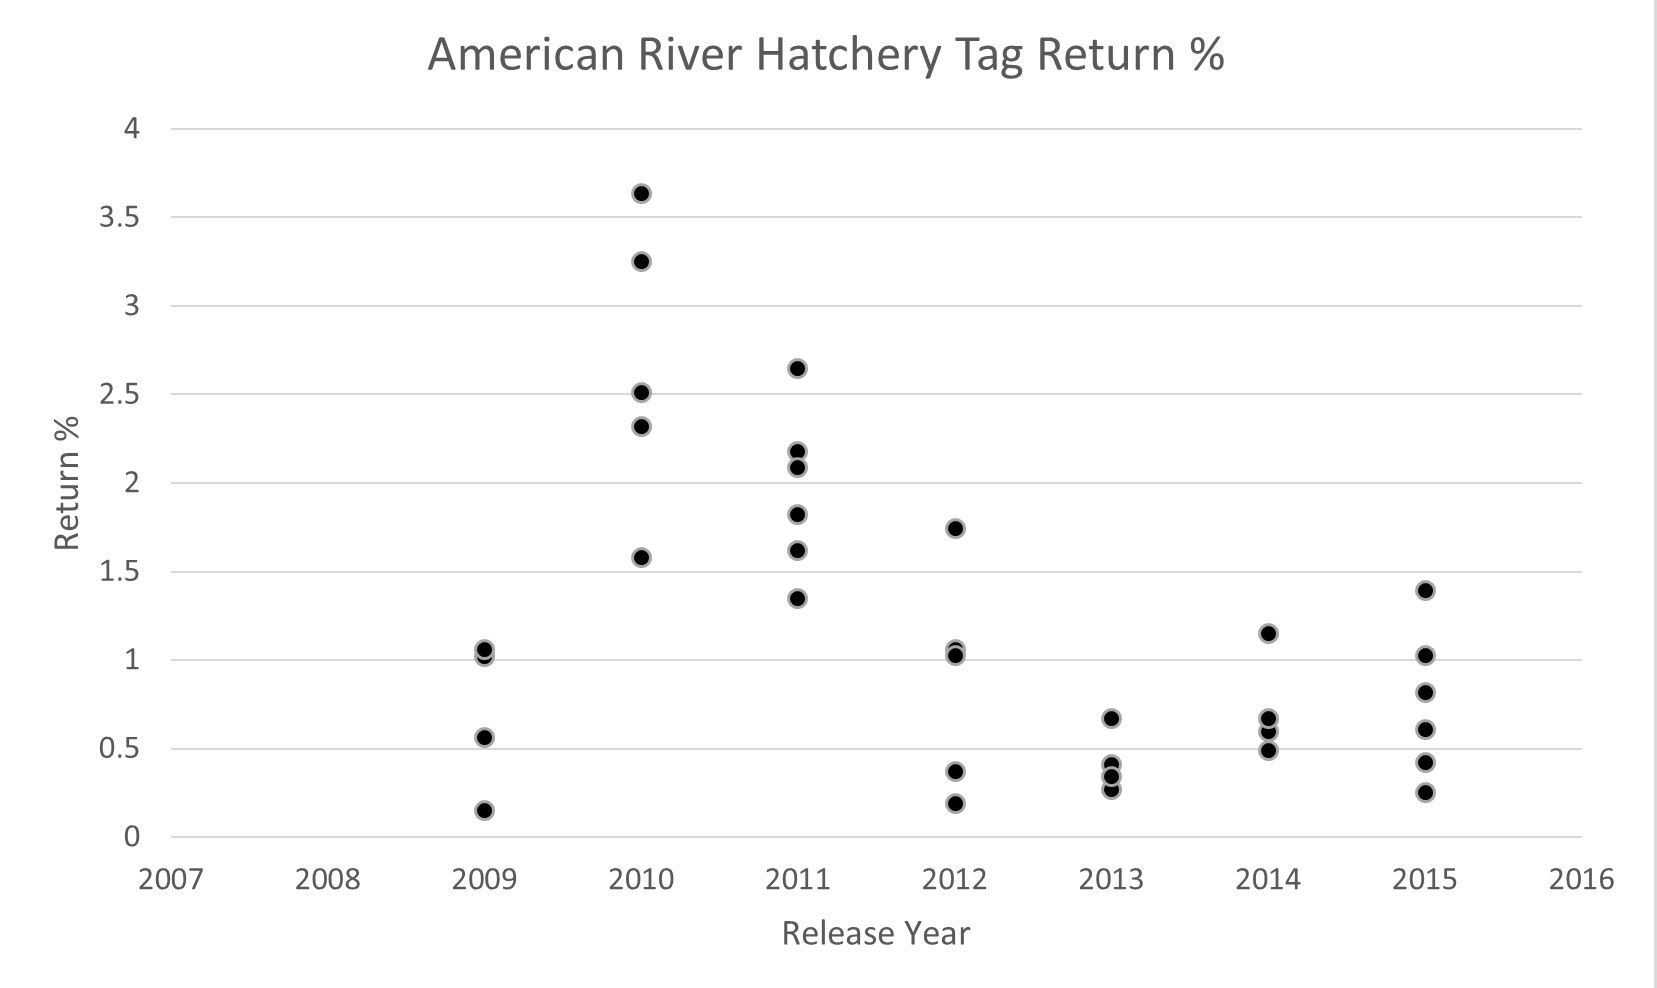 Figure 3. American River Hatchery smolt release group survival (%return) for 2009 to 2015. Data Source: https://www.rmis.org/.